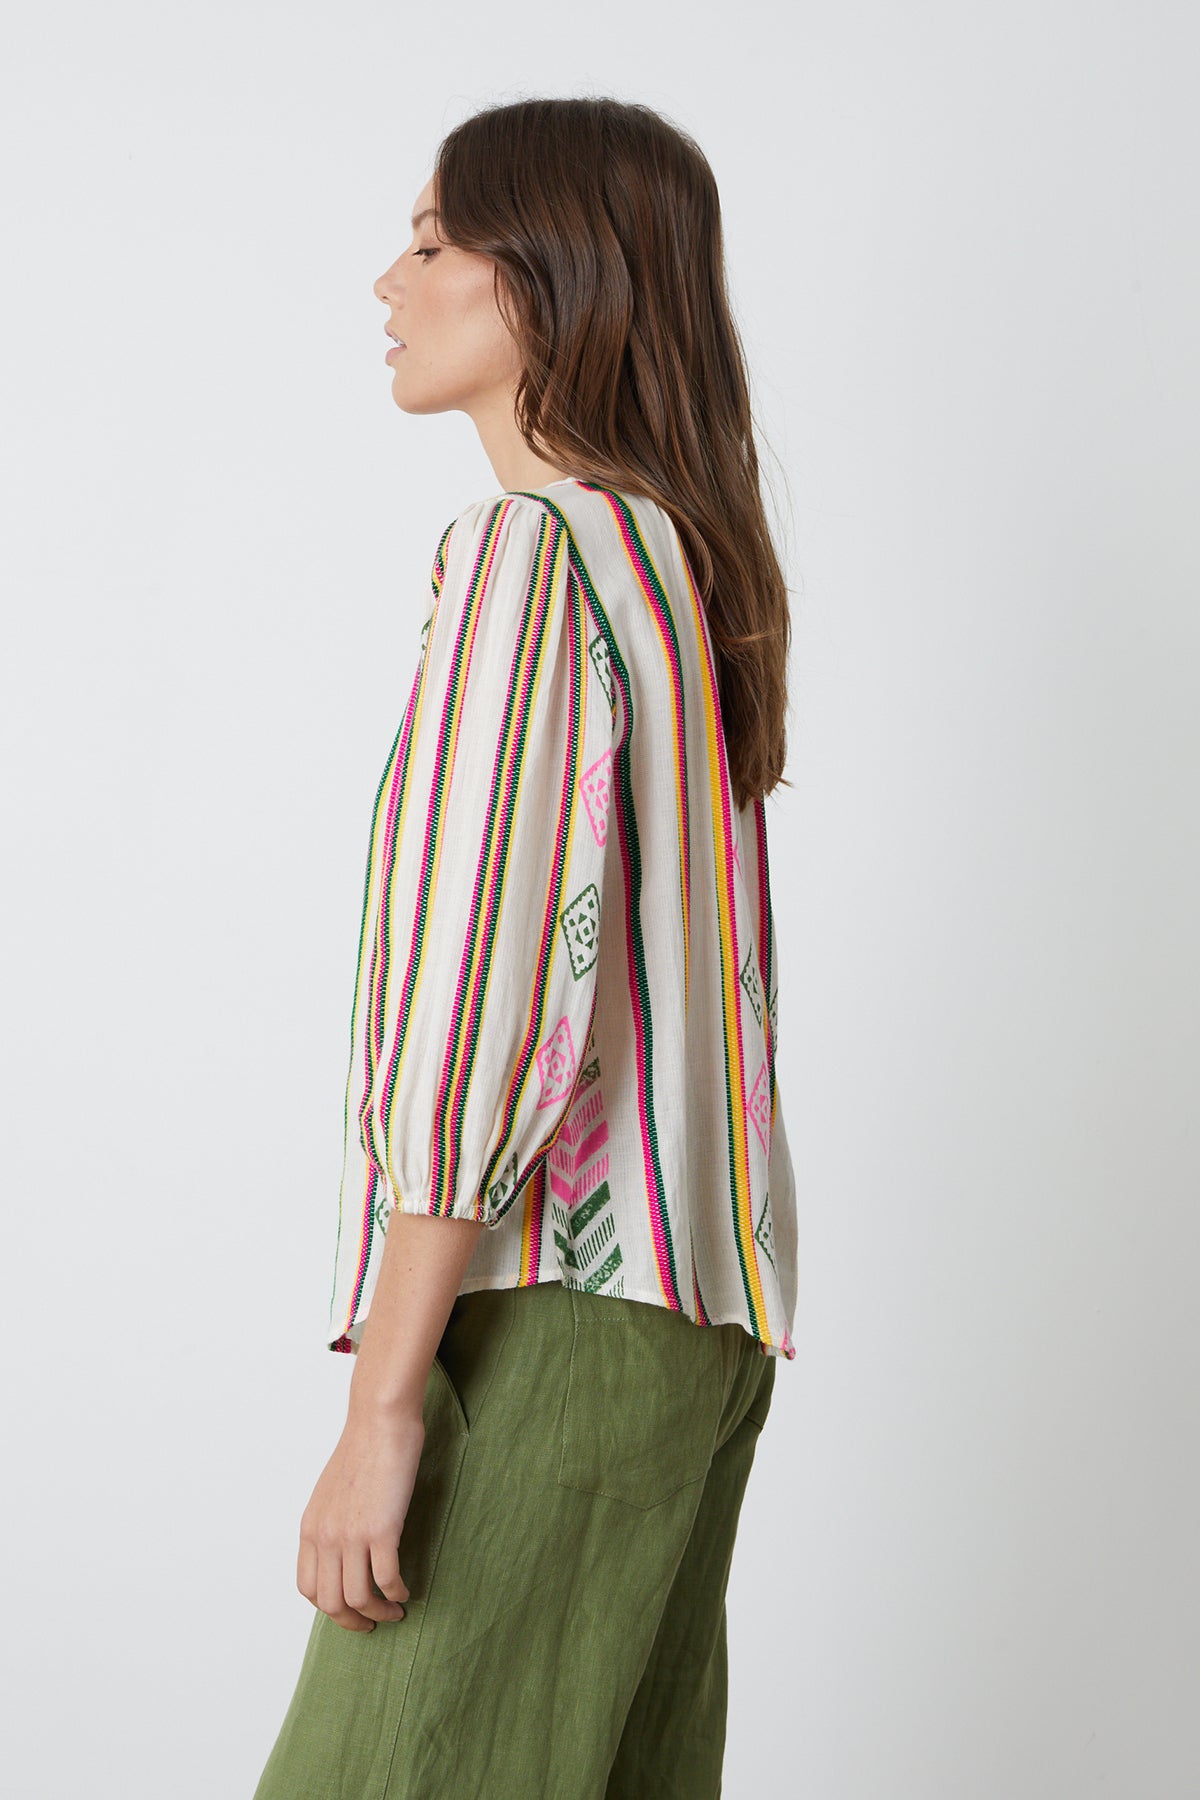 Beth Boho Top in multi colored jacquard print with Dru pant in basil green side-26255707308225